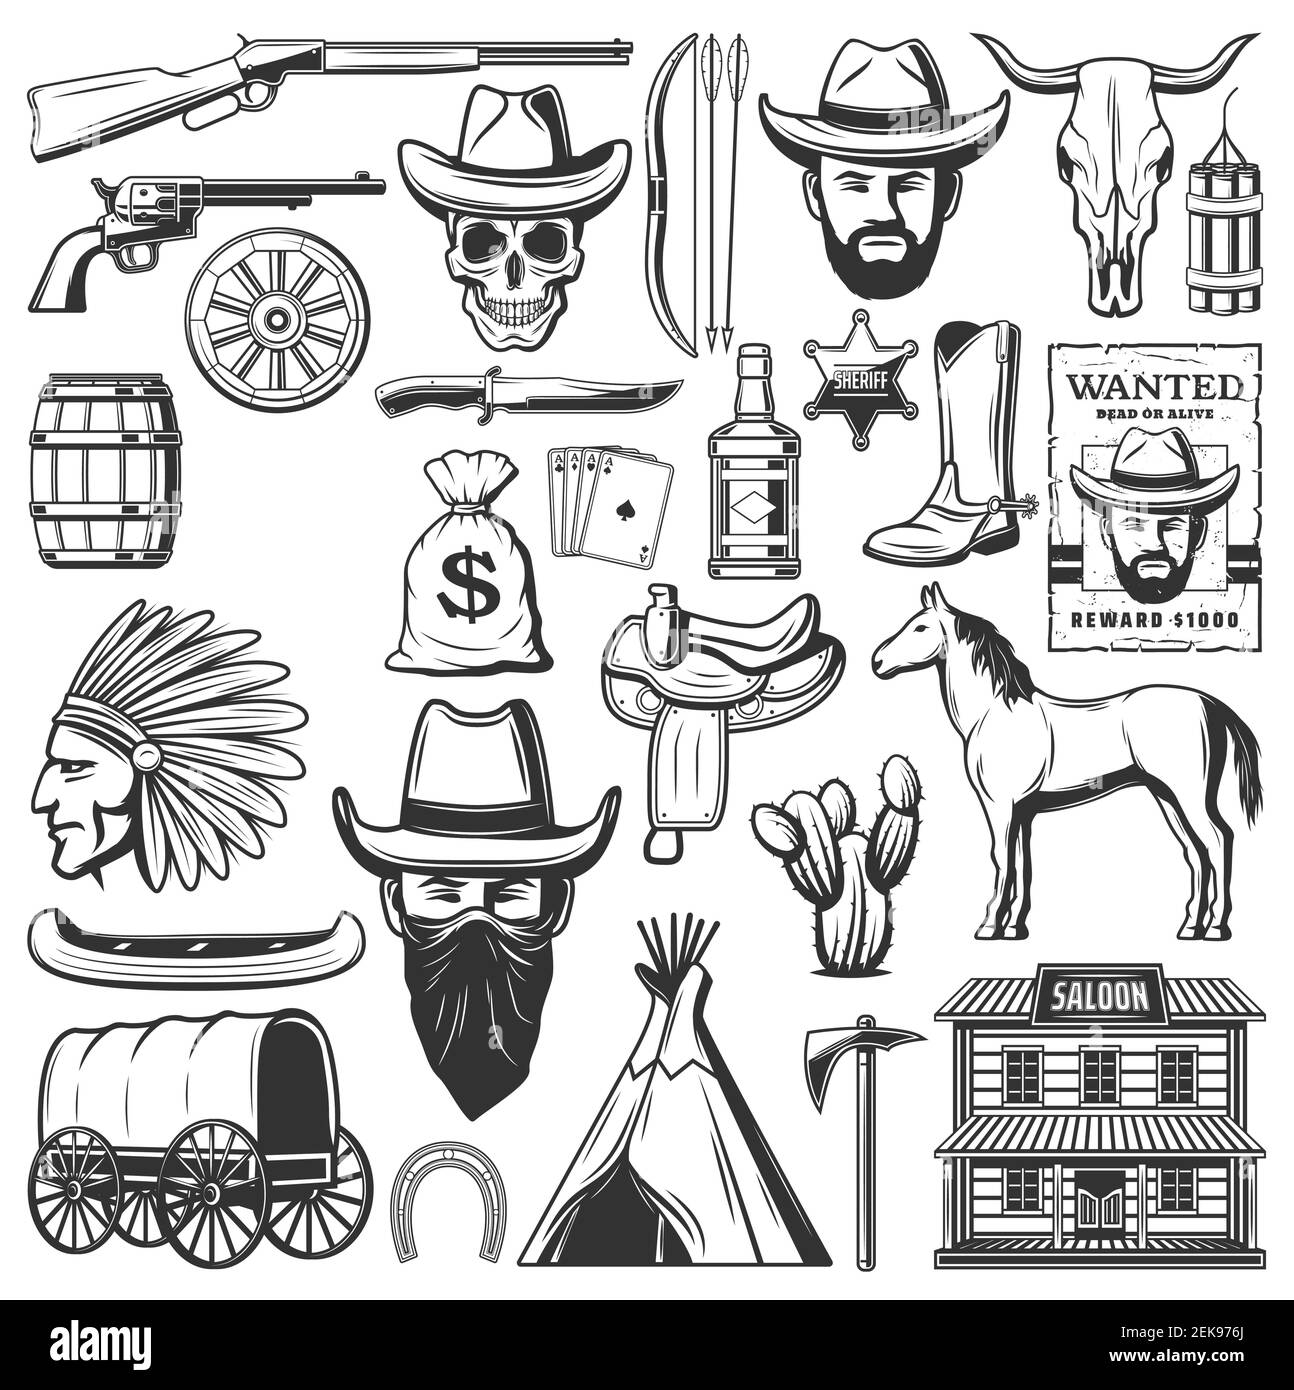 Wild West cowboys, American Western sheriff and Indigenous symbols. Vector canoe and wigwam hunt, wanted robber poster, wagon cart and horse saddle or Stock Vector